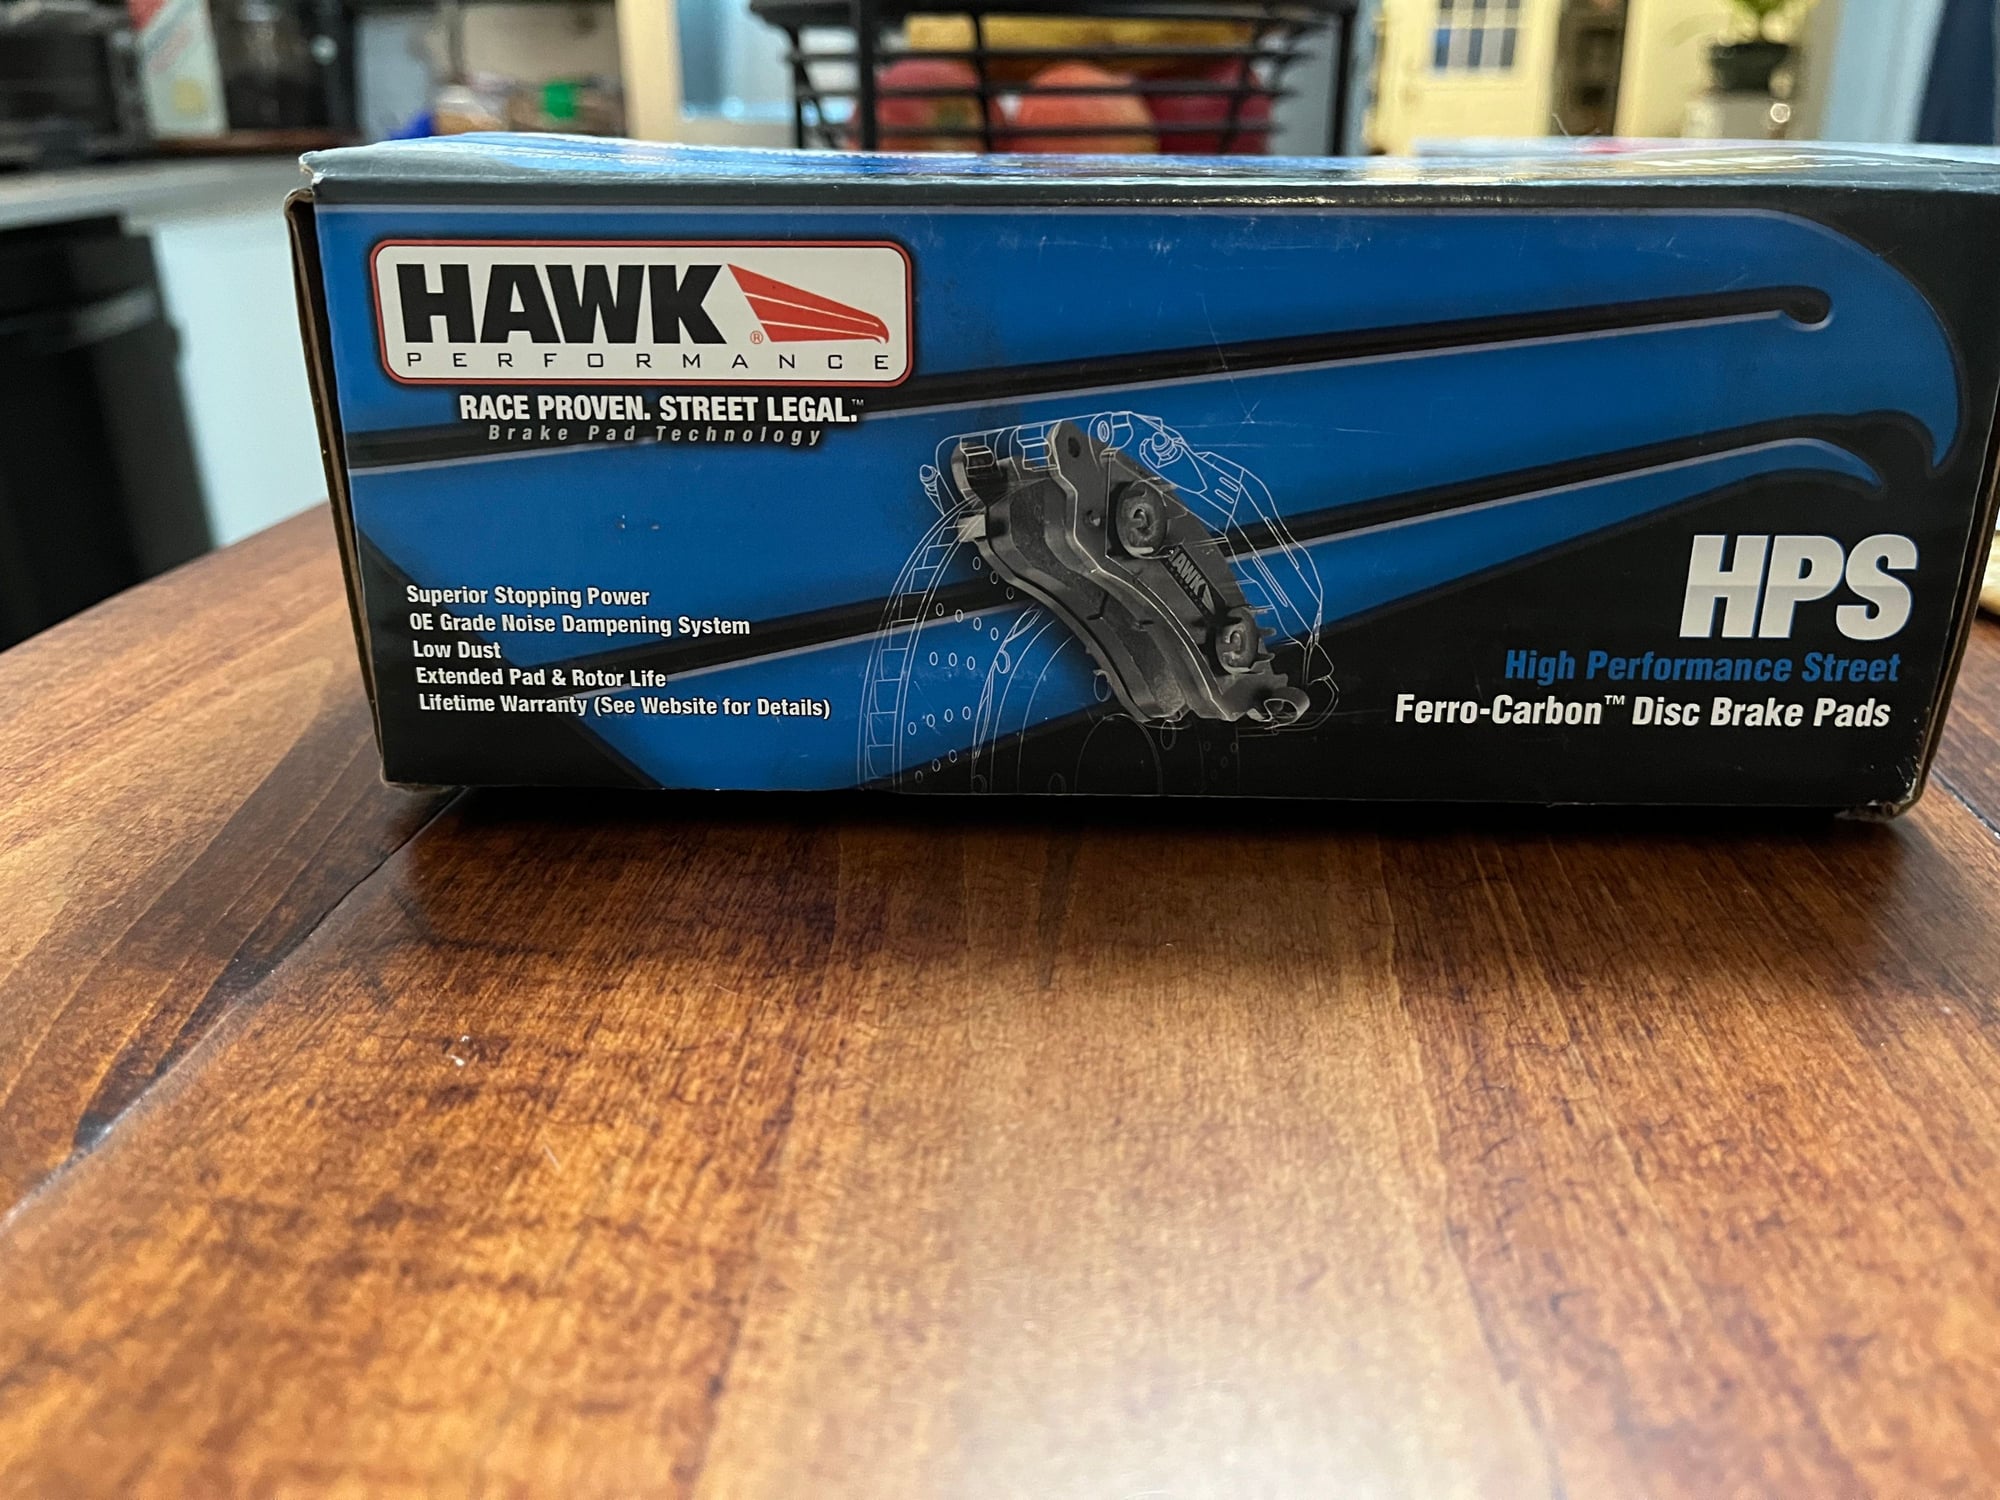 Brakes - Hawk brakes for FD - New - Upton, MA 1568, United States